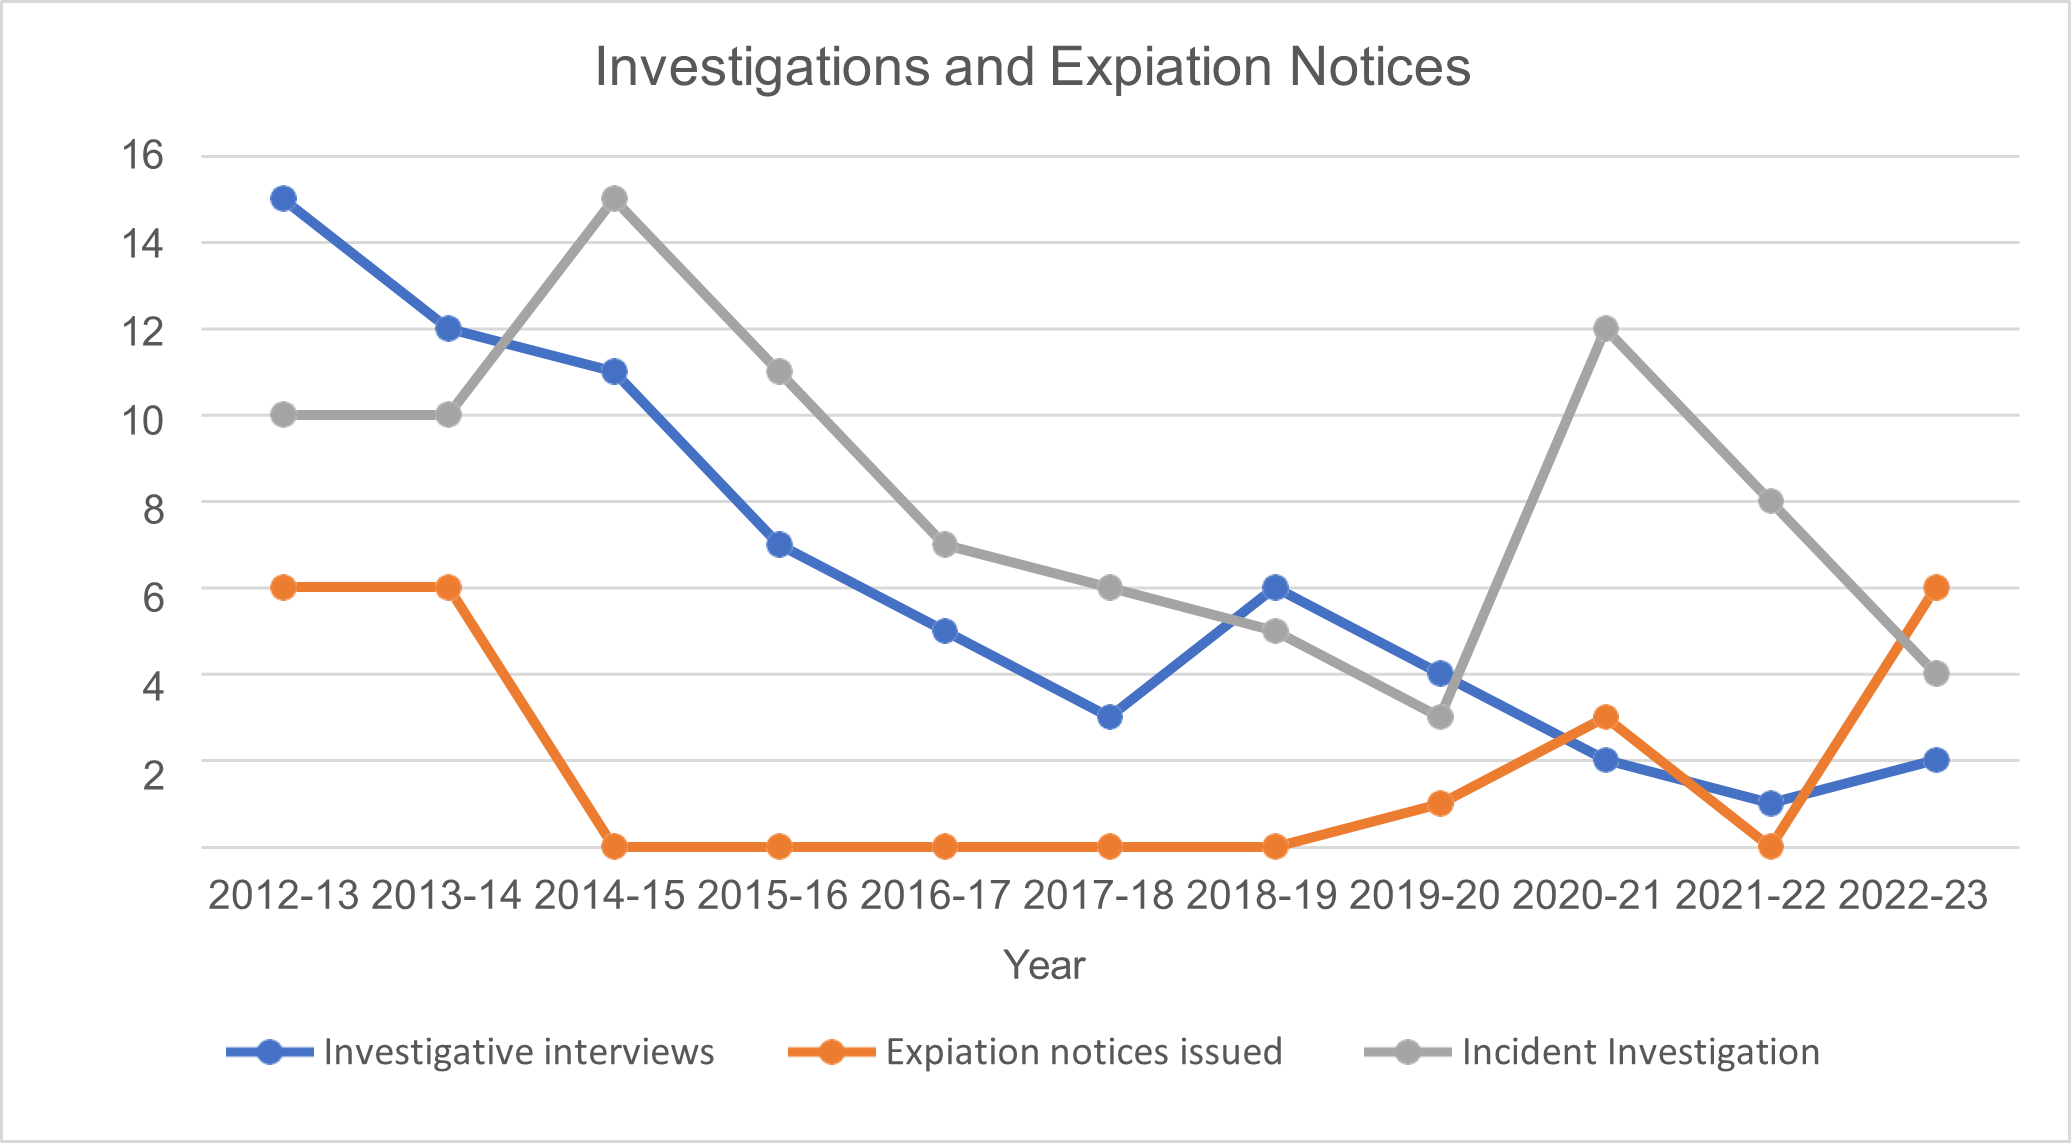 A chart showing the number of investigations and expiation notices since the year 2012-13. It shows for the year 2022-23, there were six expiation notices issued, four incident investigations and two investigative interviews. The previous year had no expiation notices issued, eight incident investigations and one investigative interview. The year 2012-23 had six expiation notices issued, ten incident investigations and fifteen investigative interviews.